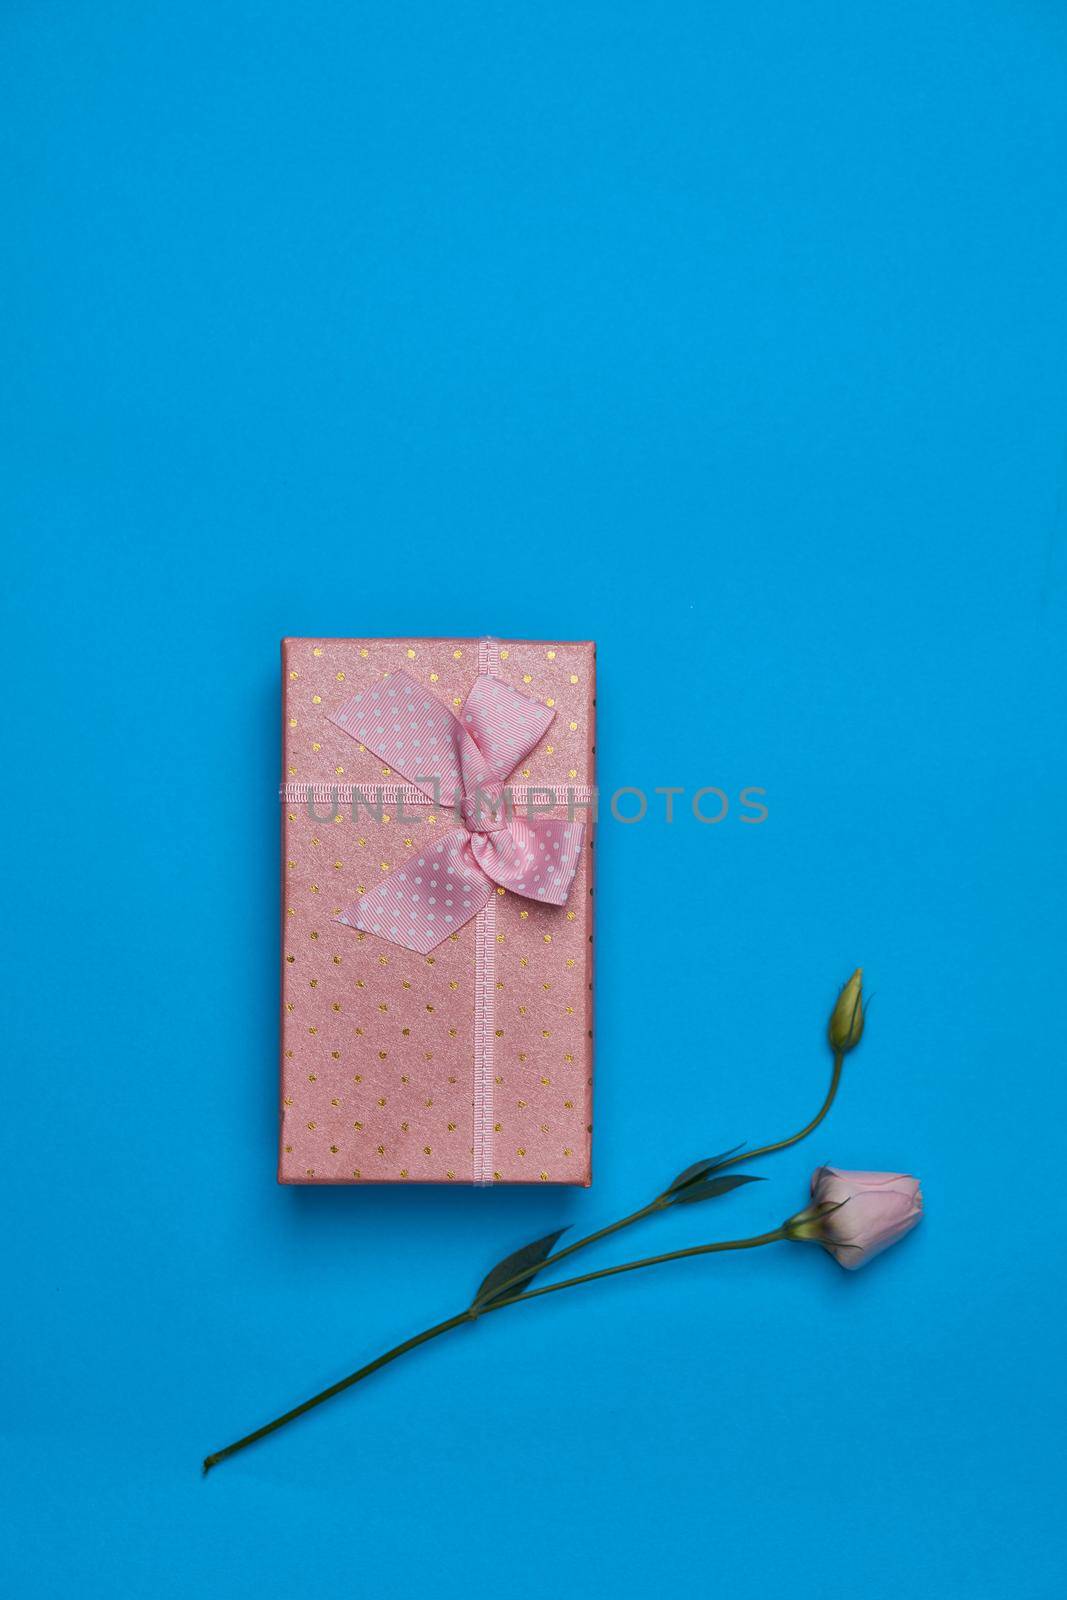 birthday gift holiday decoration blue flowers background. High quality photo